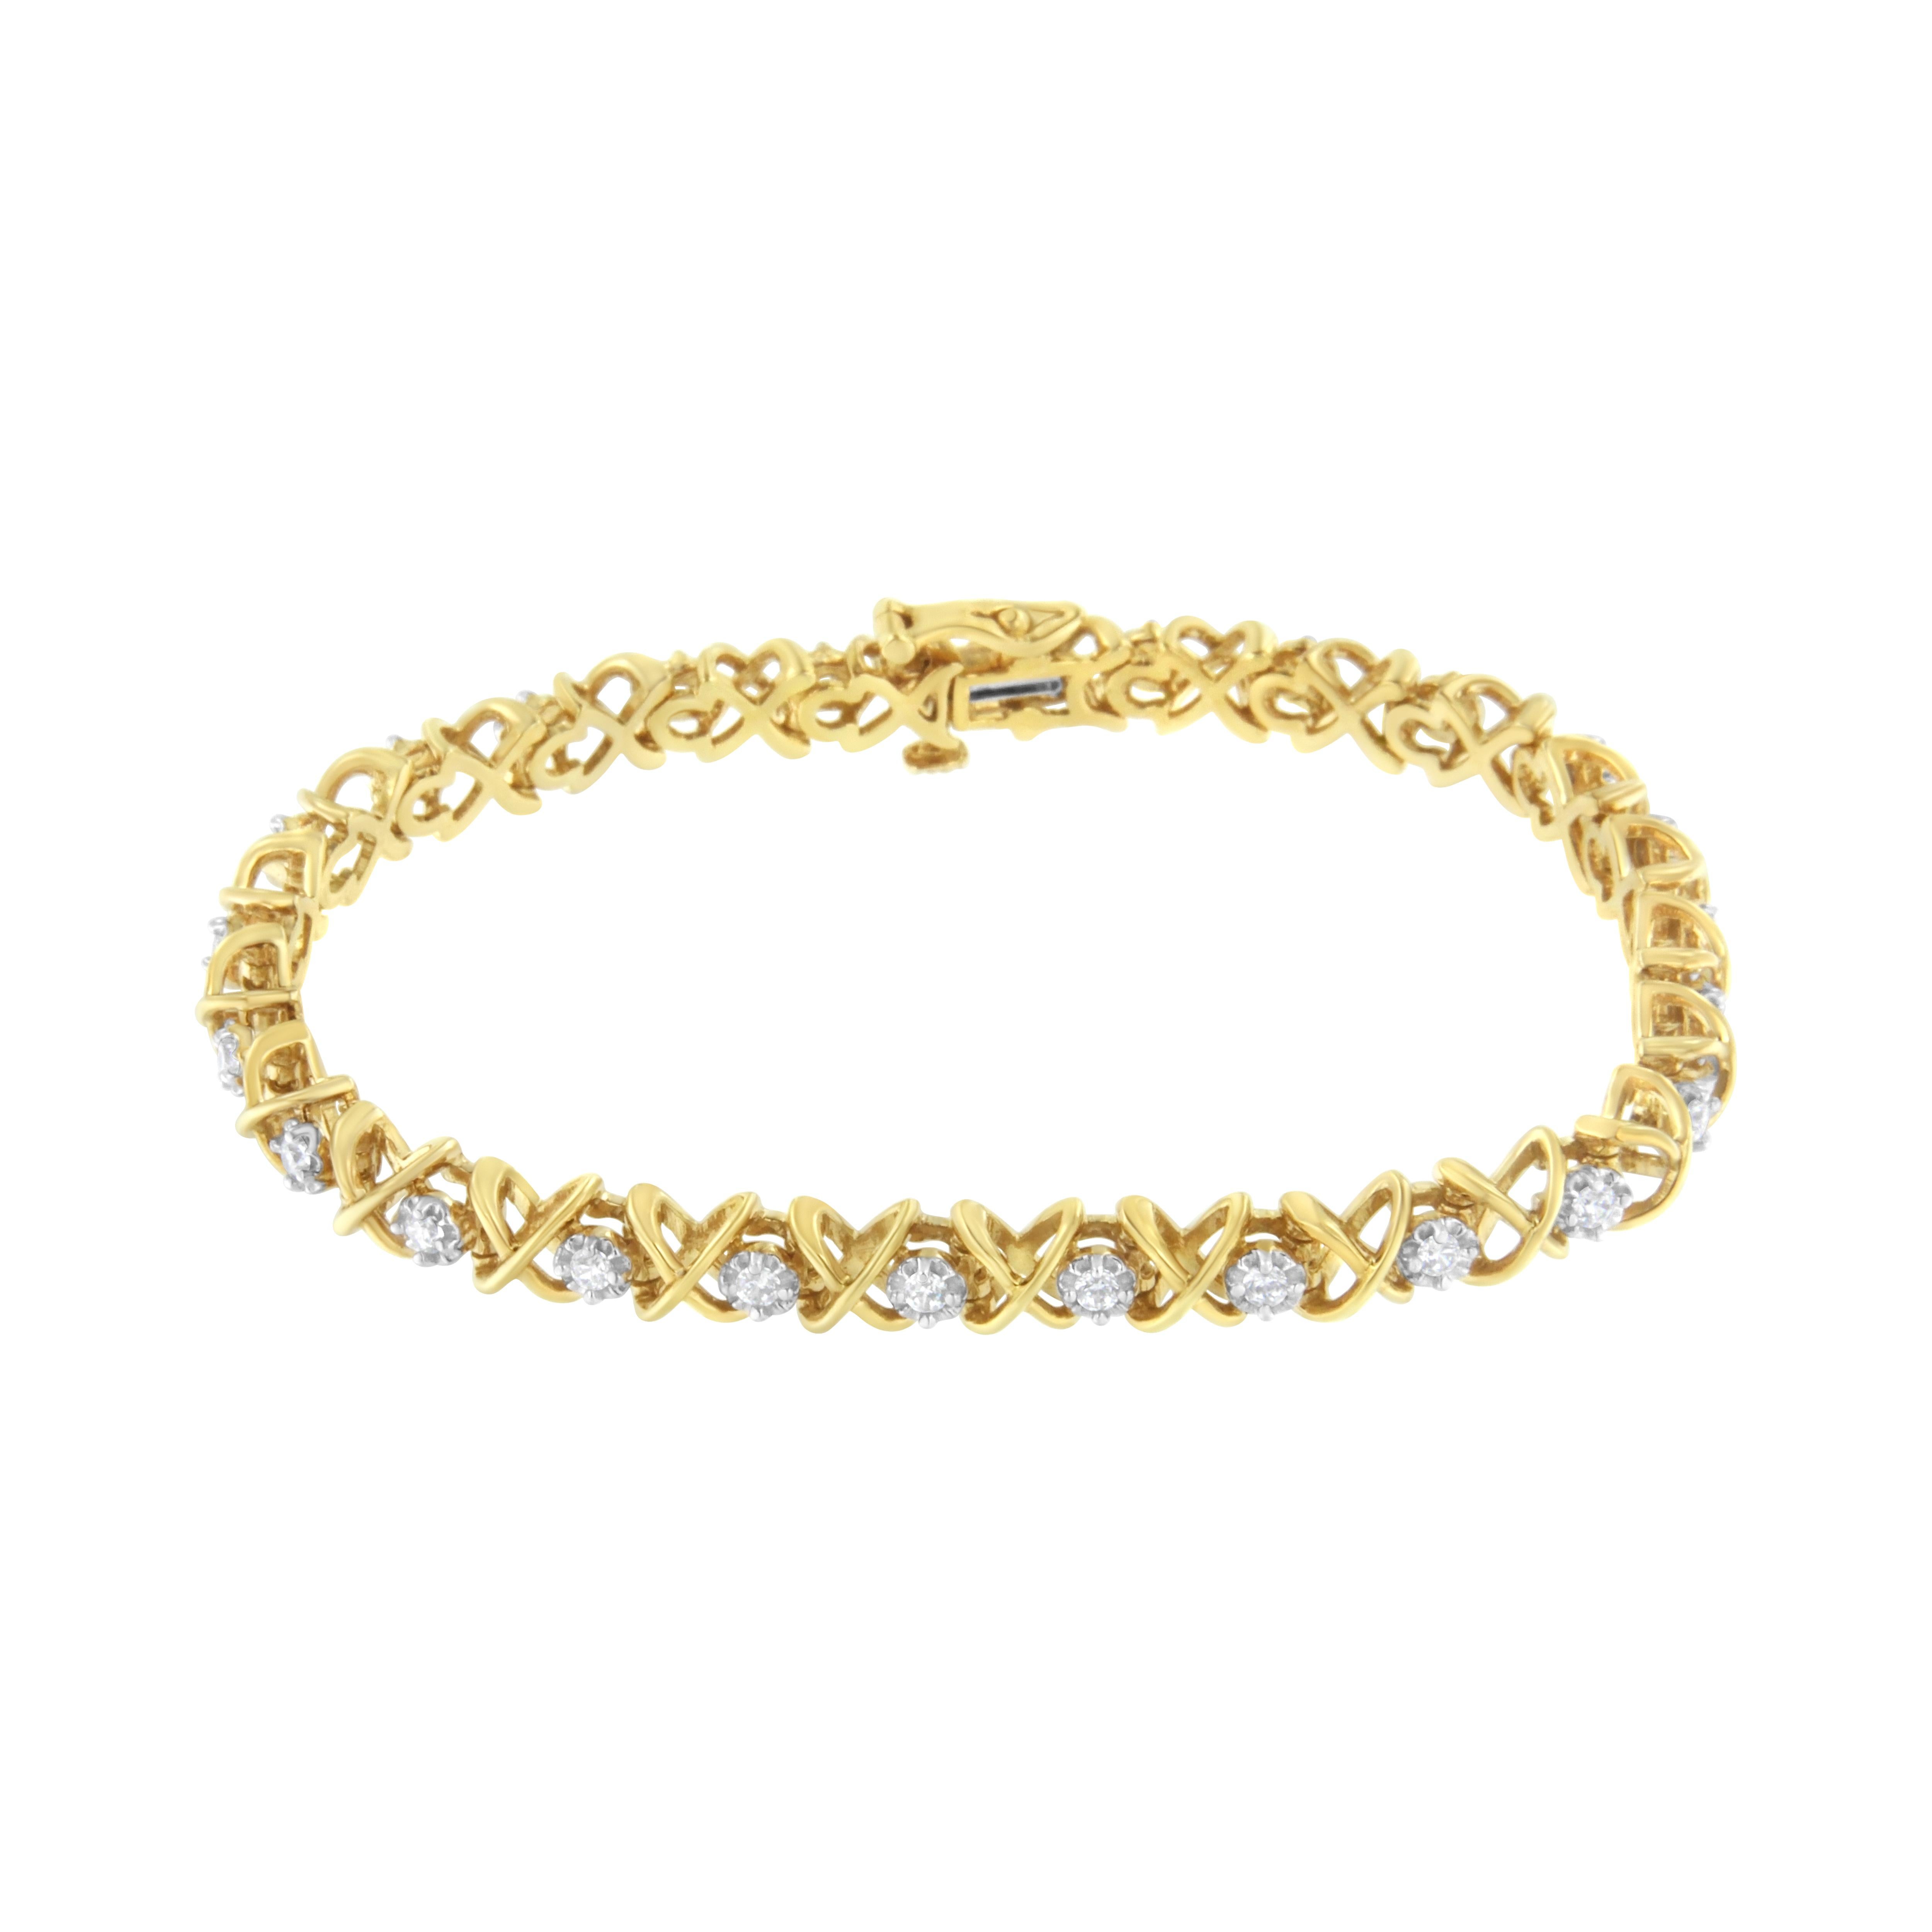 Delicately crafted 10k yellow gold plated sterling silver 